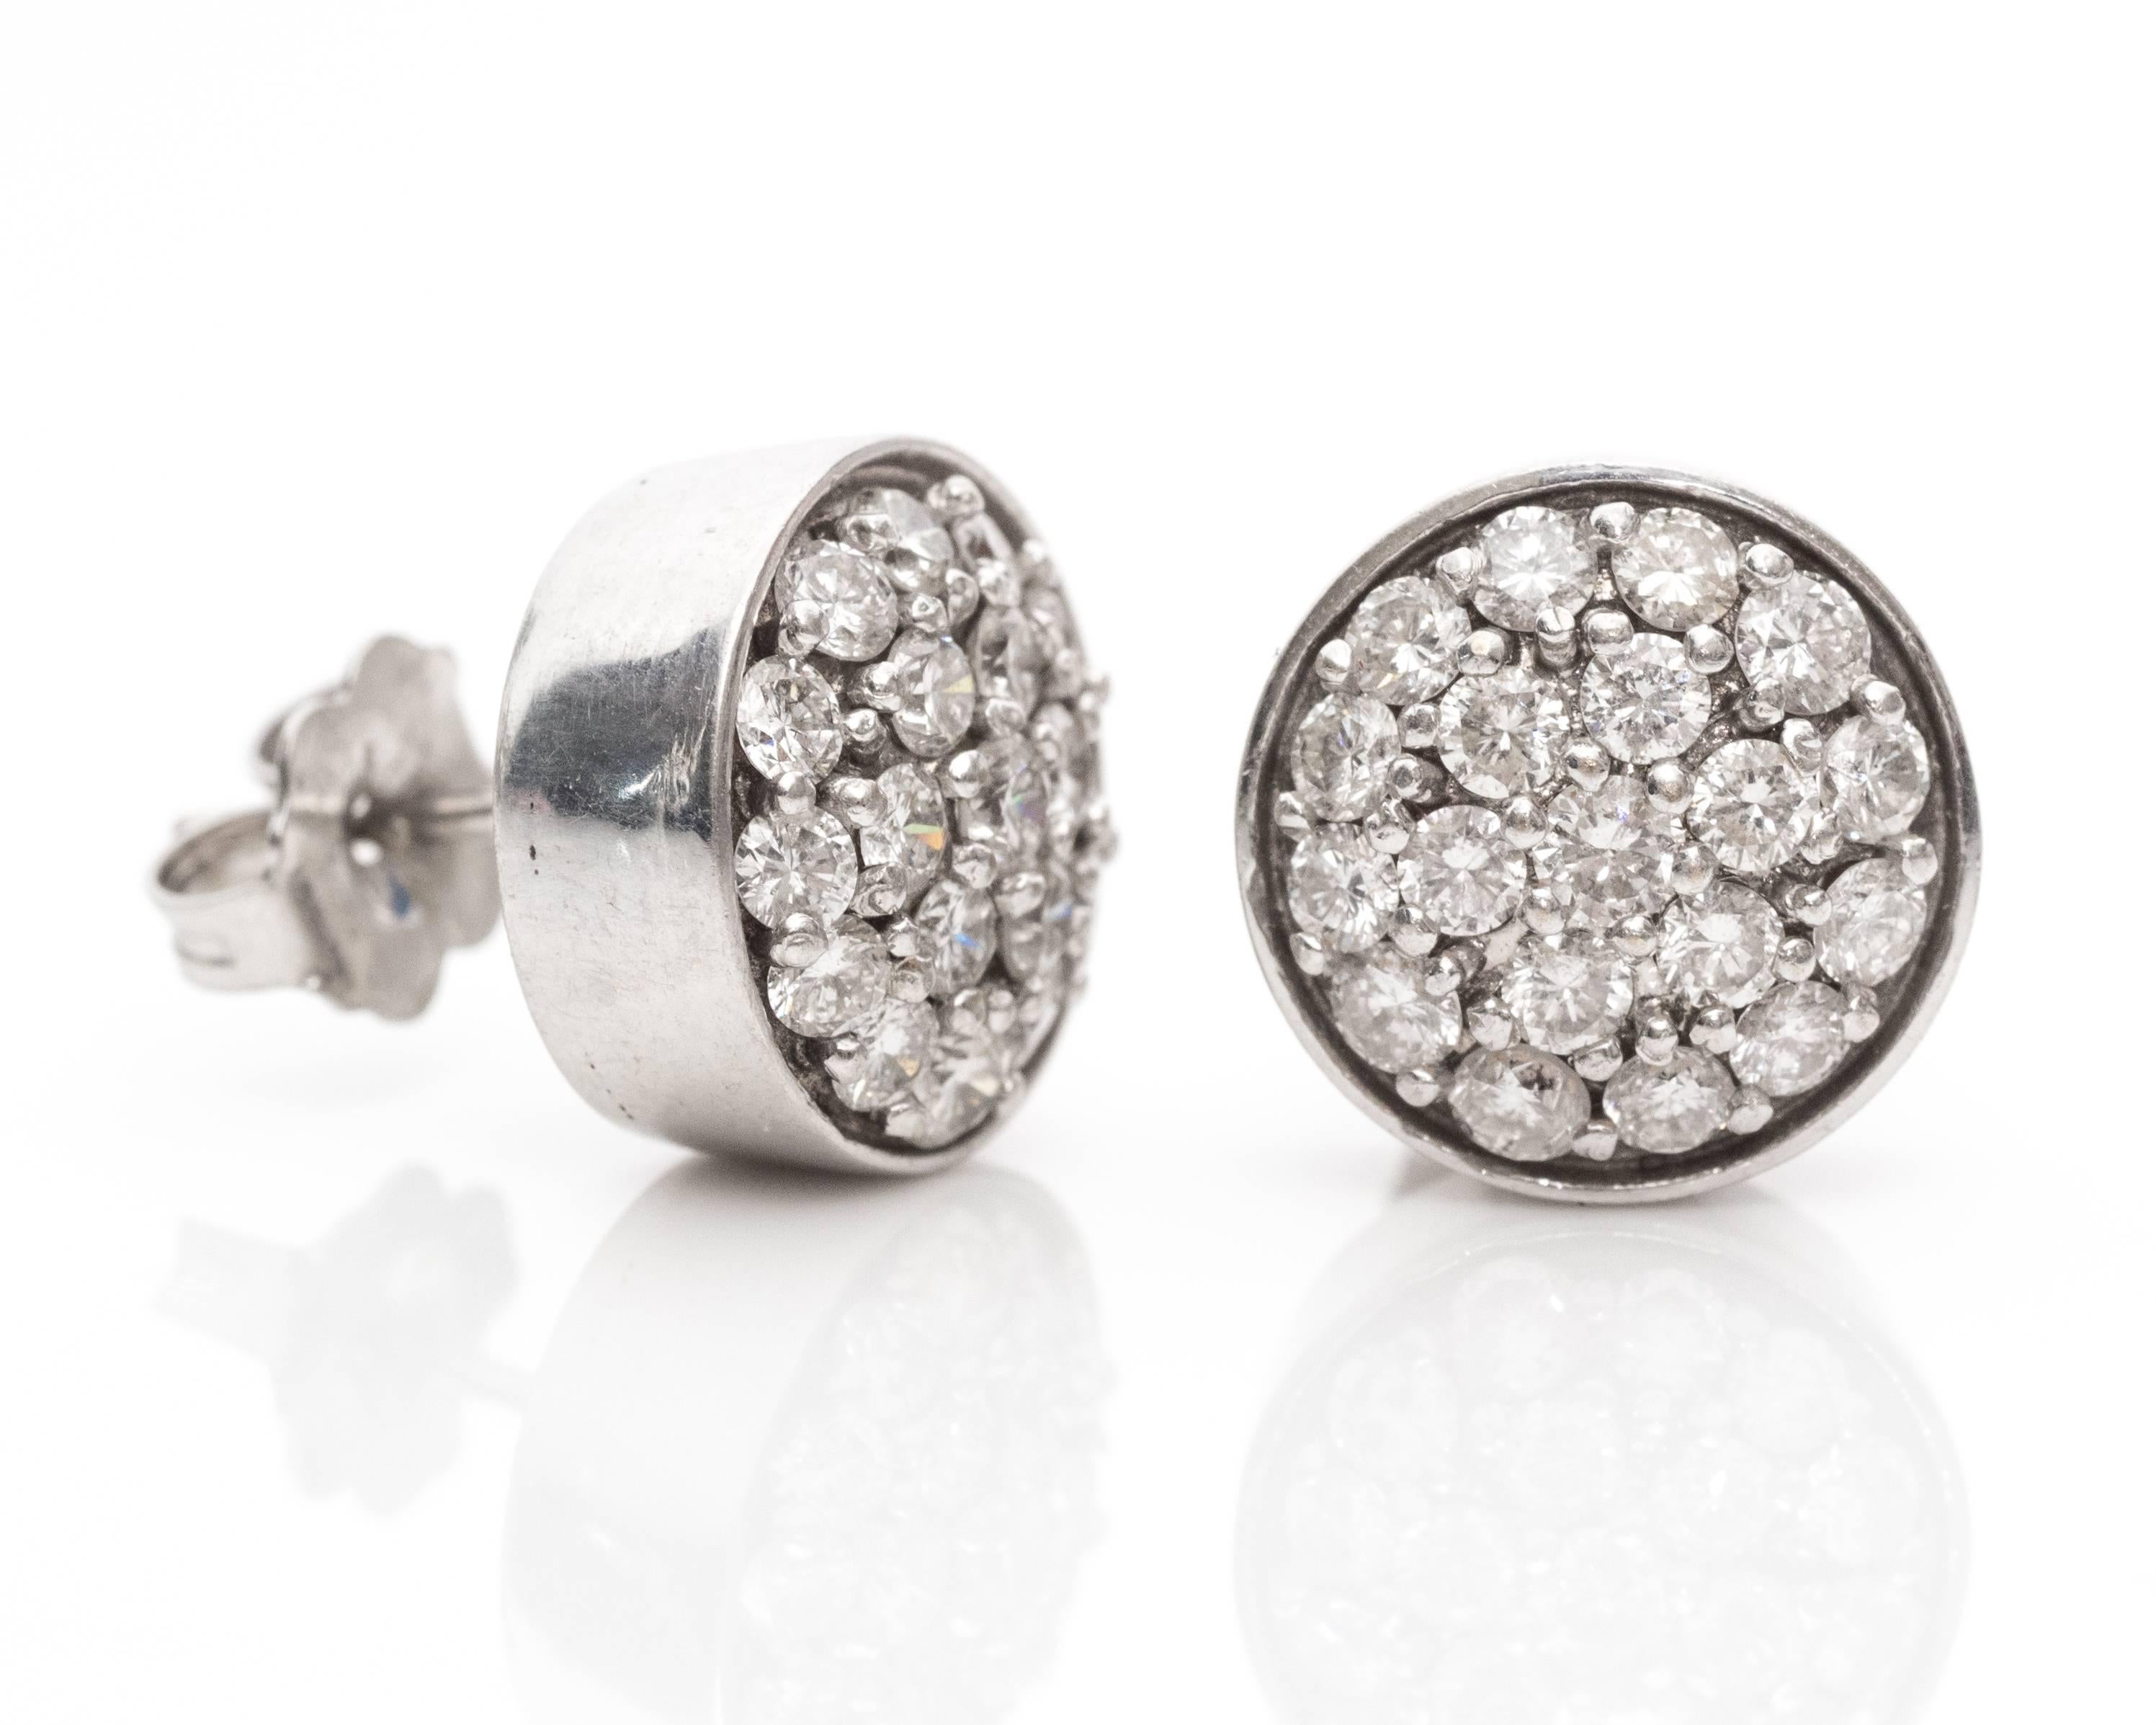 Each earring has 19 Diamonds prong set within a round bezel frame. The setting creates the illusion of a 3 ct diamond stud. The earrings are crafted from 14k White Gold. 

These earrings measure 1cm across. They are hallmarked TYCOON 14K.

The metal